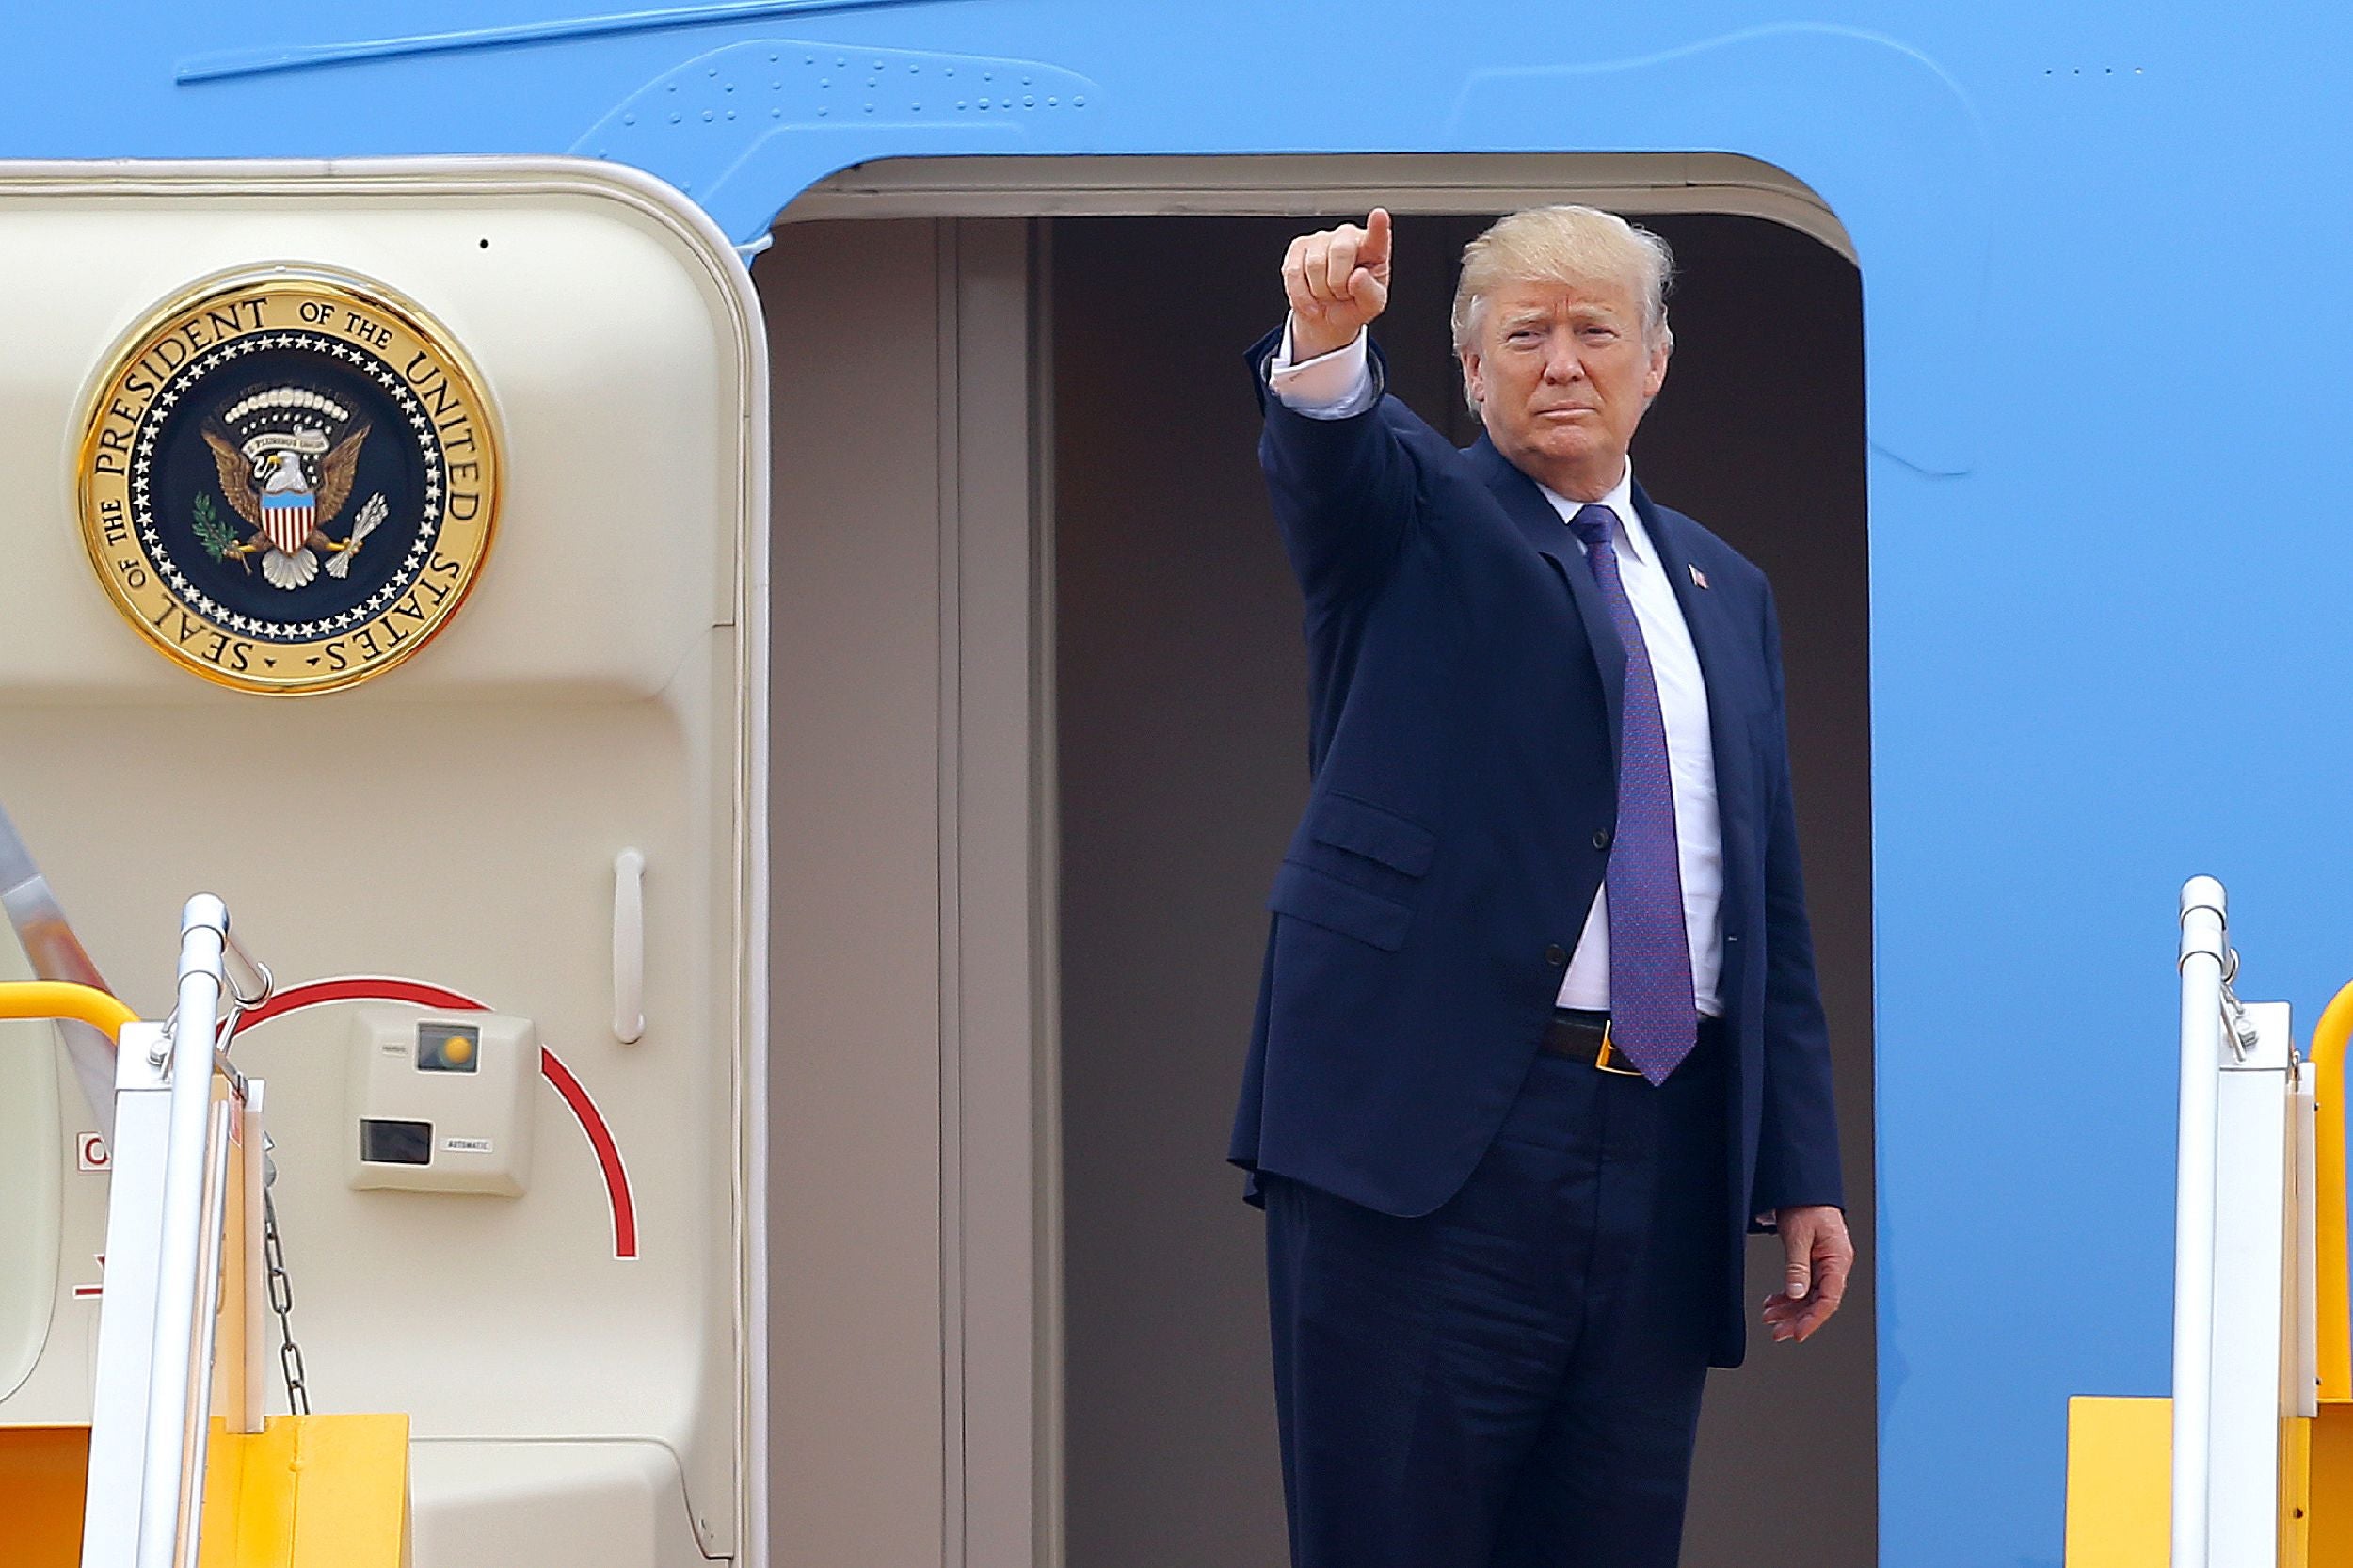 US President Donald Trump gestures as he boards Air Force One